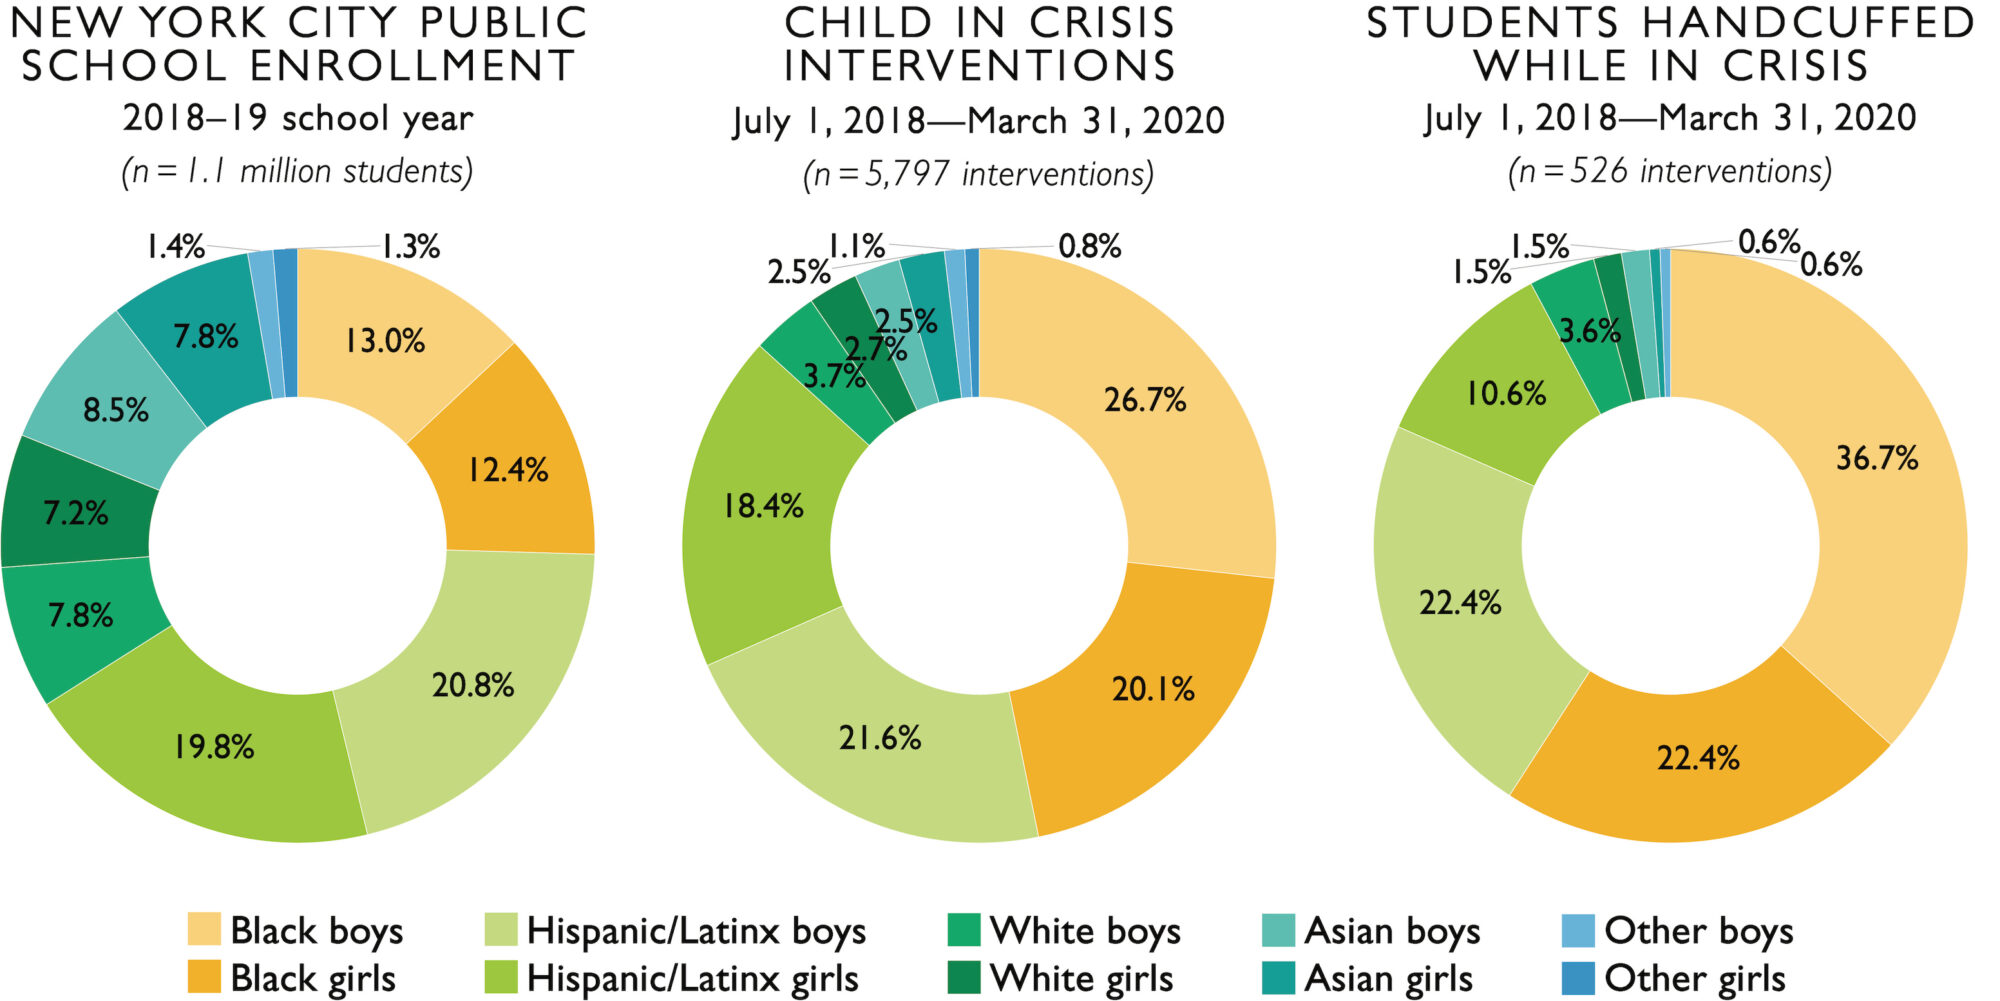 Three pie charts, one showing the demographic breakdown (race + gender) of NYC public school enrollment, one showing the demographic breakdown of students involved in child in crisis interventions, and one showing the demographic breakdown of interventions involving the use of handcuffs.